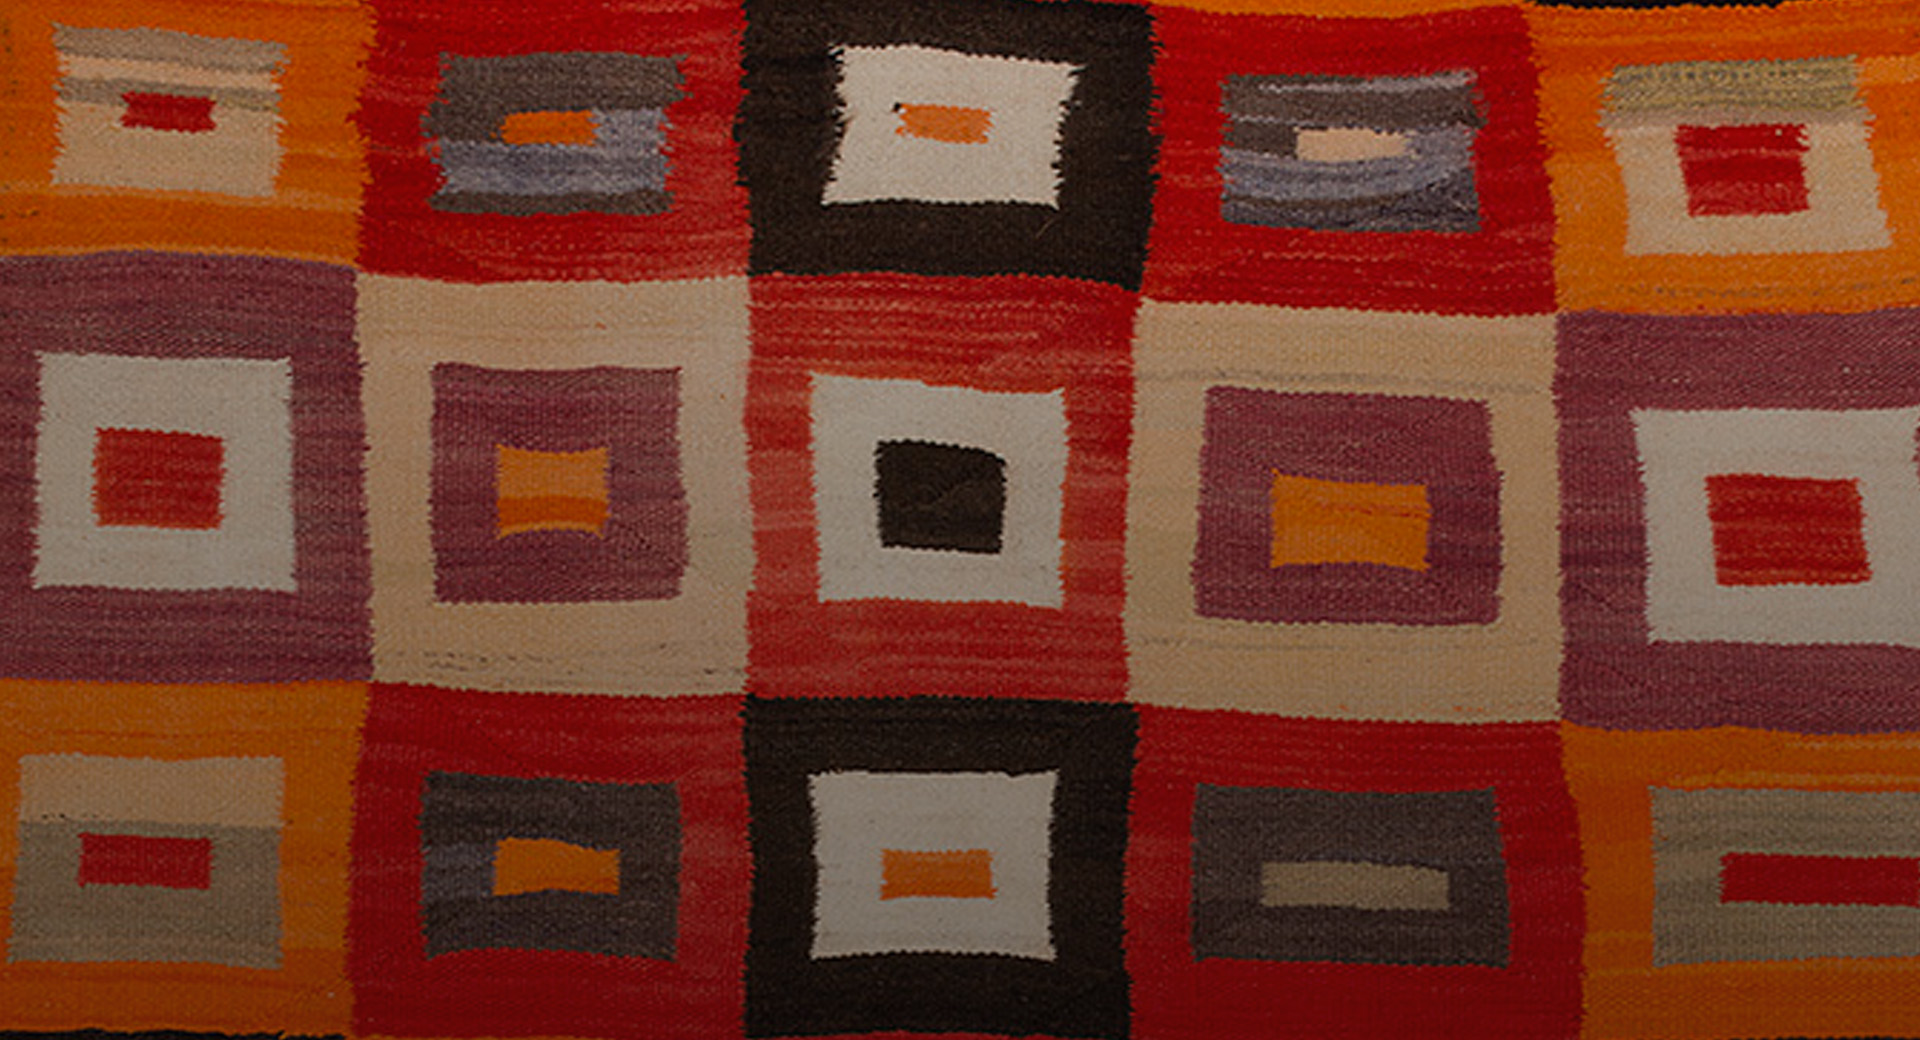 A Navajo textile with different sized squares on it in shades of red, orange, black and white.